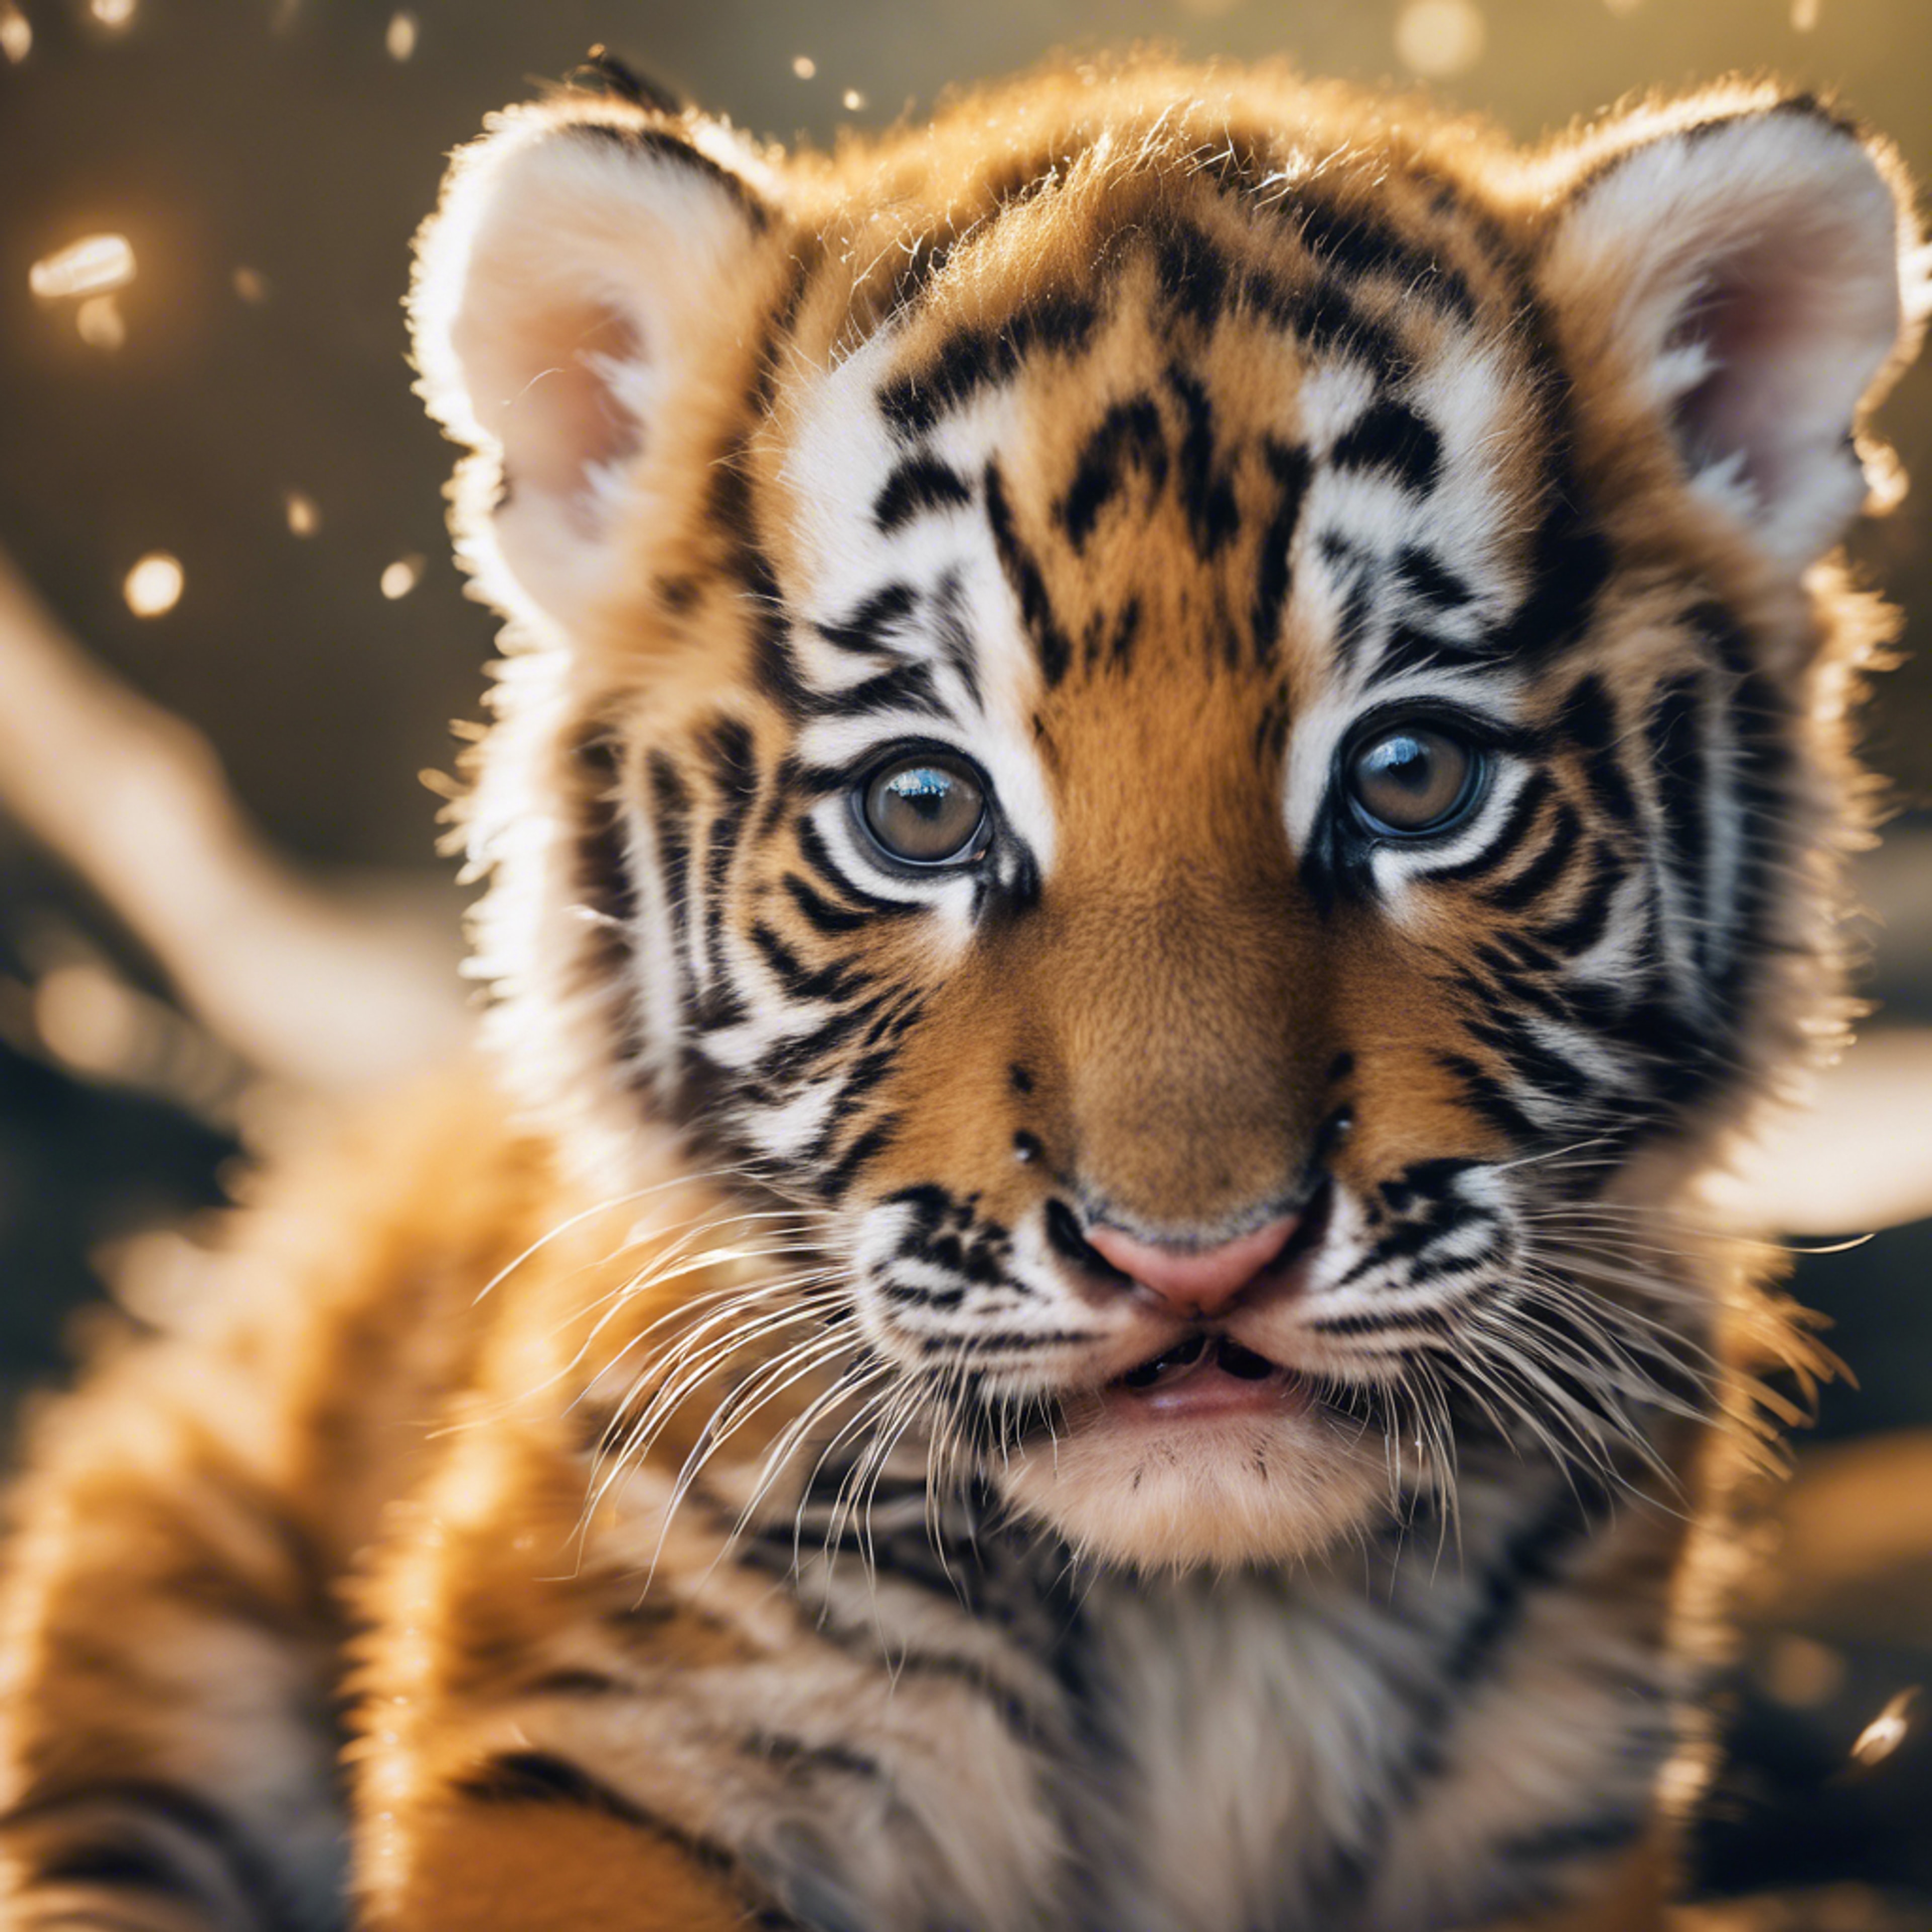 A lively orange tiger cub with large round eyes in a kawaii rendering. Ფონი[41206ae9e13545bea05a]